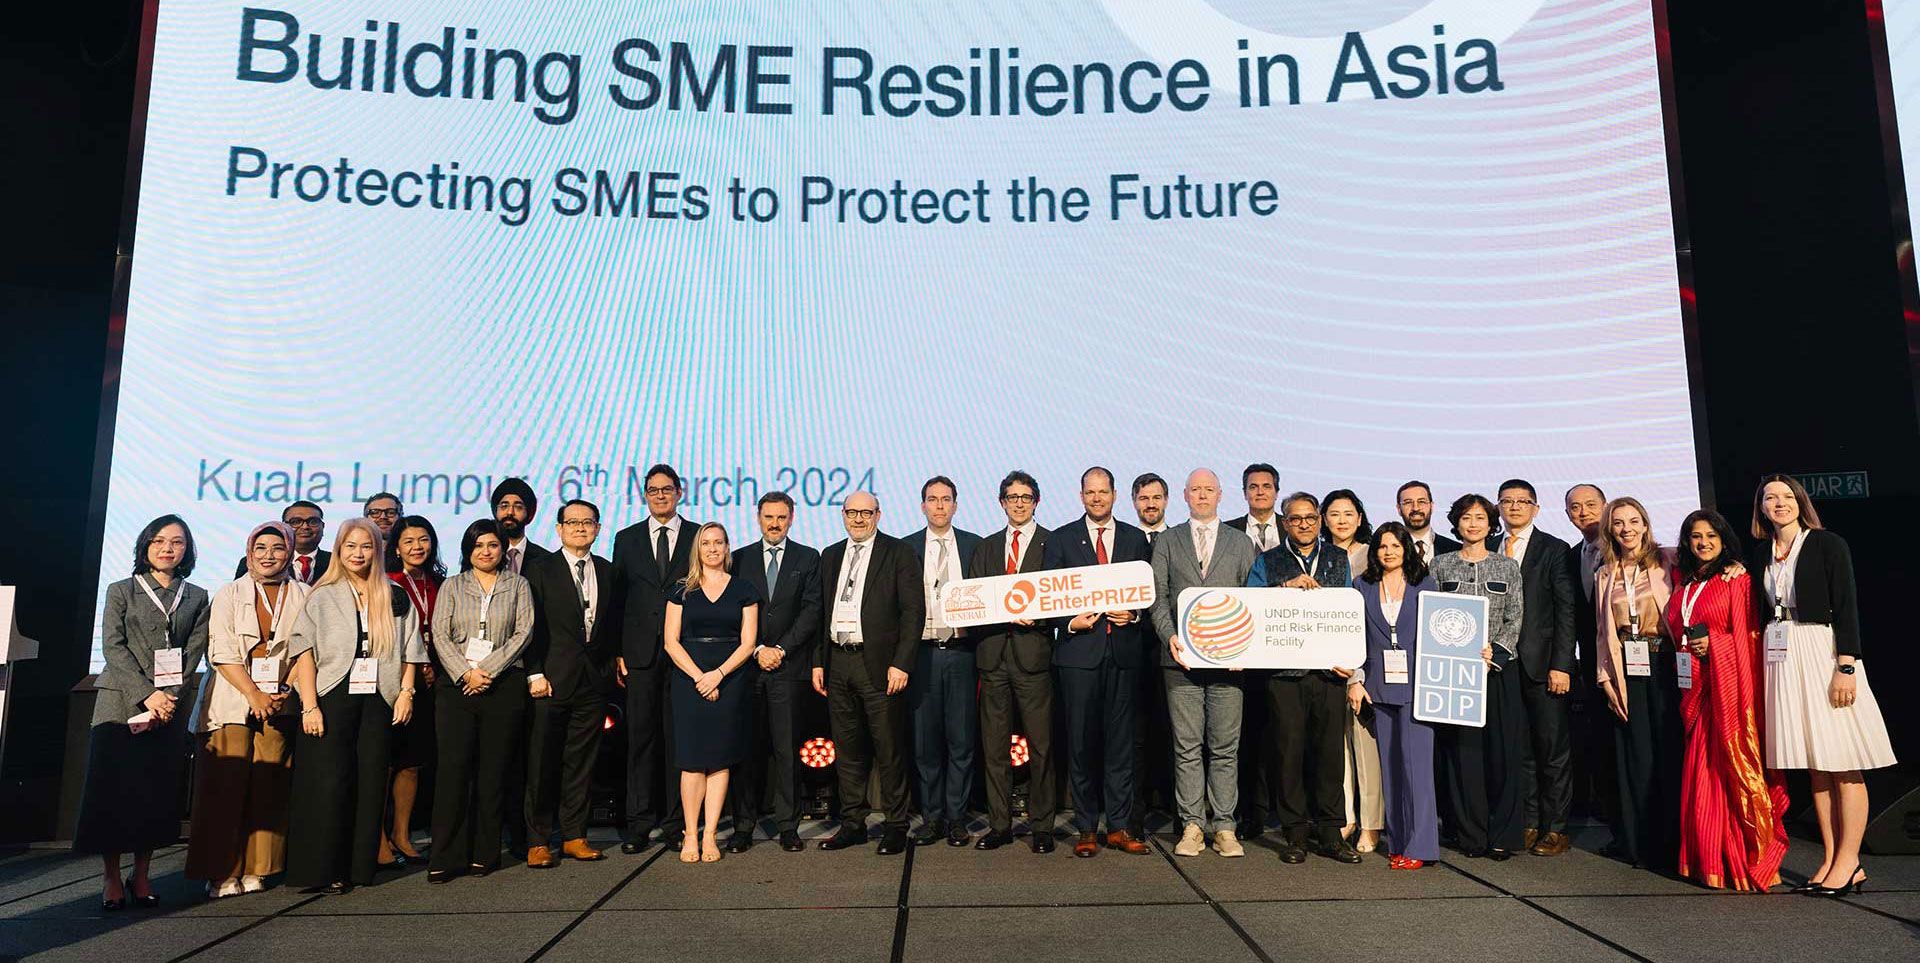 Images - Generali and UNDP are building SME resilience in Asia